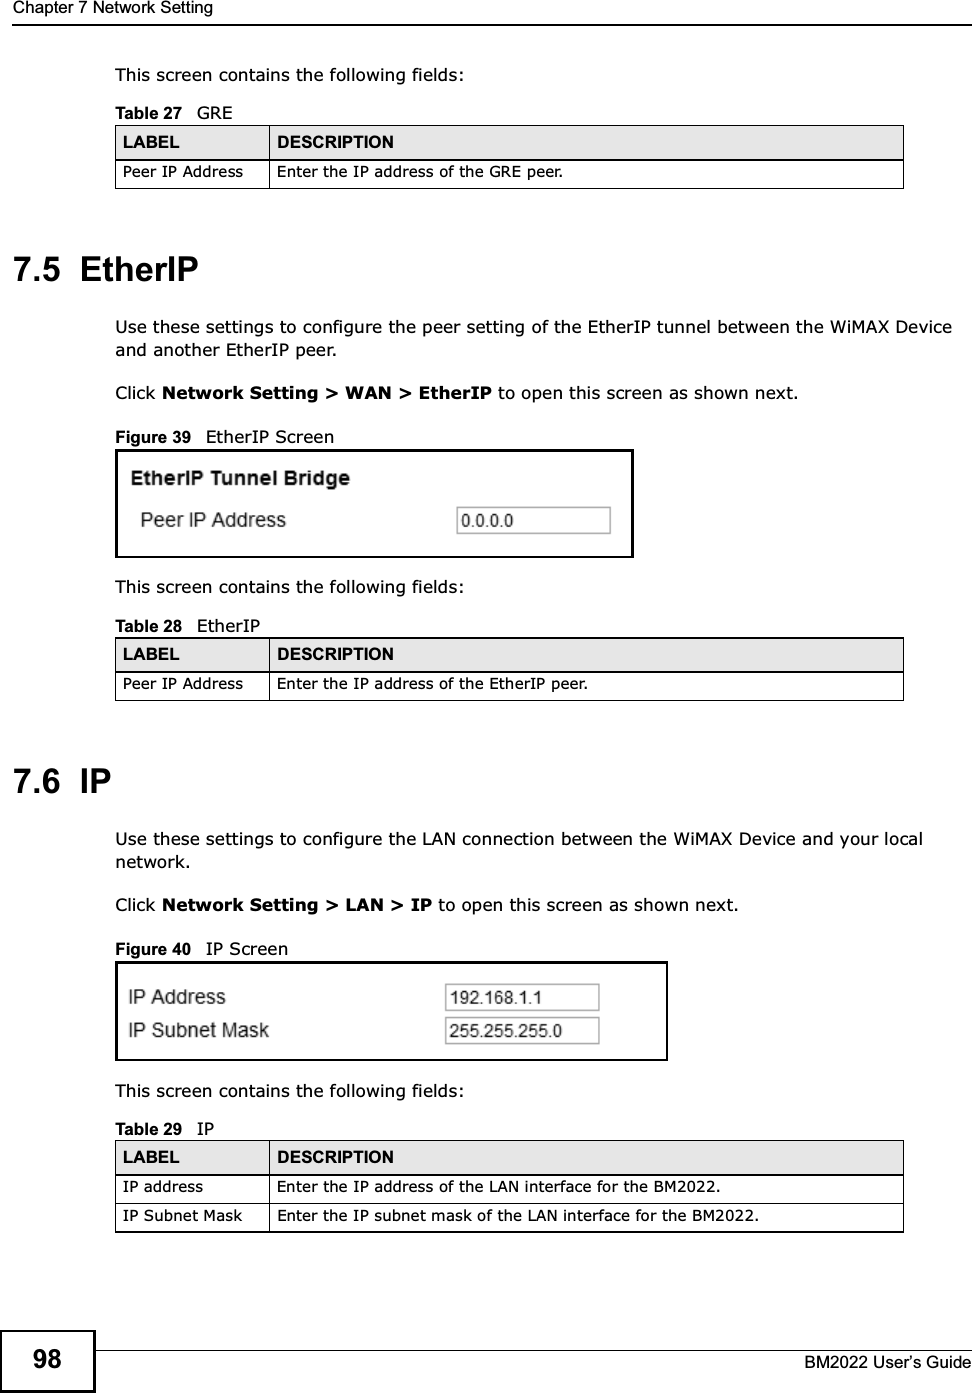 Chapter 7 Network SettingBM2022 Users Guide98This screen contains the following fields:7.5  EtherIPUse these settings to configure the peer setting of the EtherIP tunnel between the WiMAX Device and another EtherIP peer.Click Network Setting &gt; WAN &gt; EtherIP to open this screen as shown next.Figure 39   EtherIP ScreenThis screen contains the following fields:7.6  IPUse these settings to configure the LAN connection between the WiMAX Device and your local network.Click Network Setting &gt; LAN &gt; IP to open this screen as shown next.Figure 40   IP ScreenThis screen contains the following fields:Table 27   GRELABEL DESCRIPTIONPeer IP Address Enter the IP address of the GRE peer.Table 28   EtherIPLABEL DESCRIPTIONPeer IP Address Enter the IP address of the EtherIP peer.Table 29   IPLABEL DESCRIPTIONIP address Enter the IP address of the LAN interface for the BM2022.IP Subnet Mask Enter the IP subnet mask of the LAN interface for the BM2022.